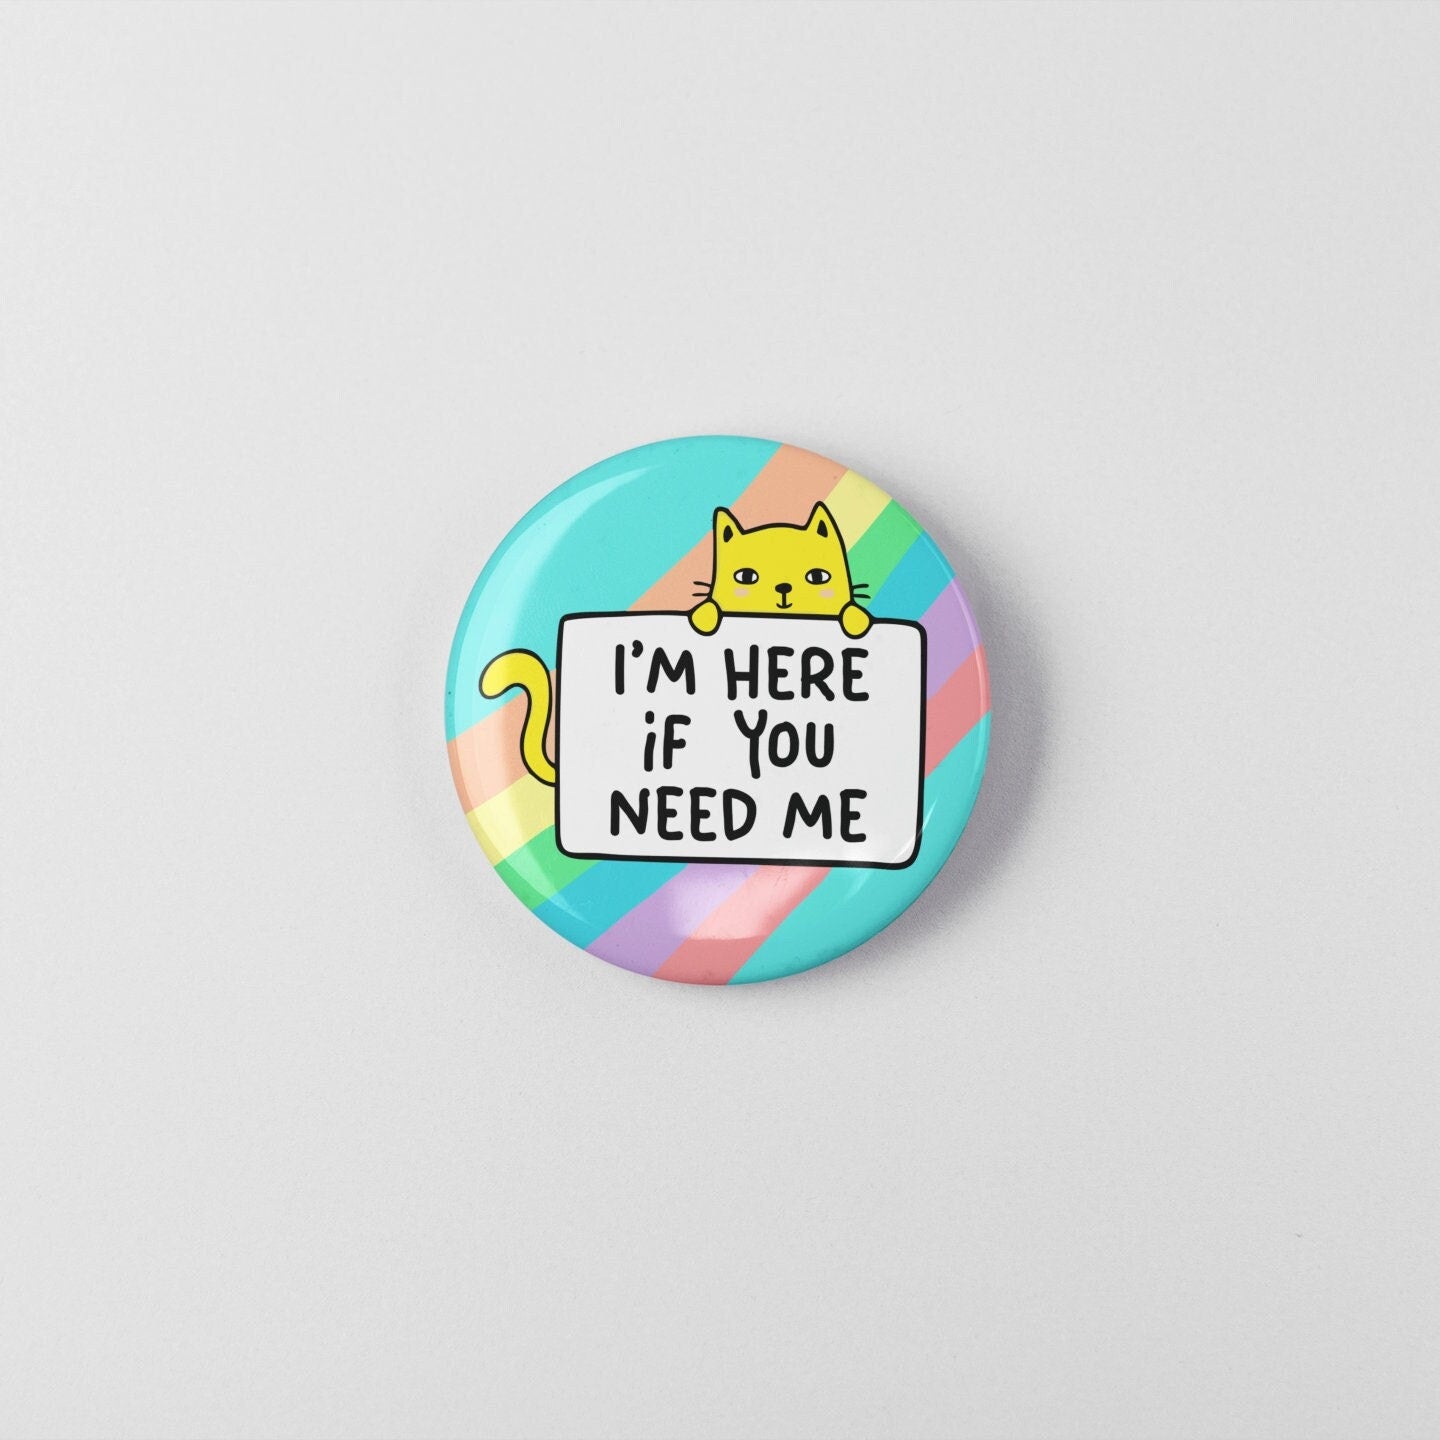 I'm Here If You Need Me - Pin Badge | Friendship Gift - Cute Gifts - Cat Badges, Cats